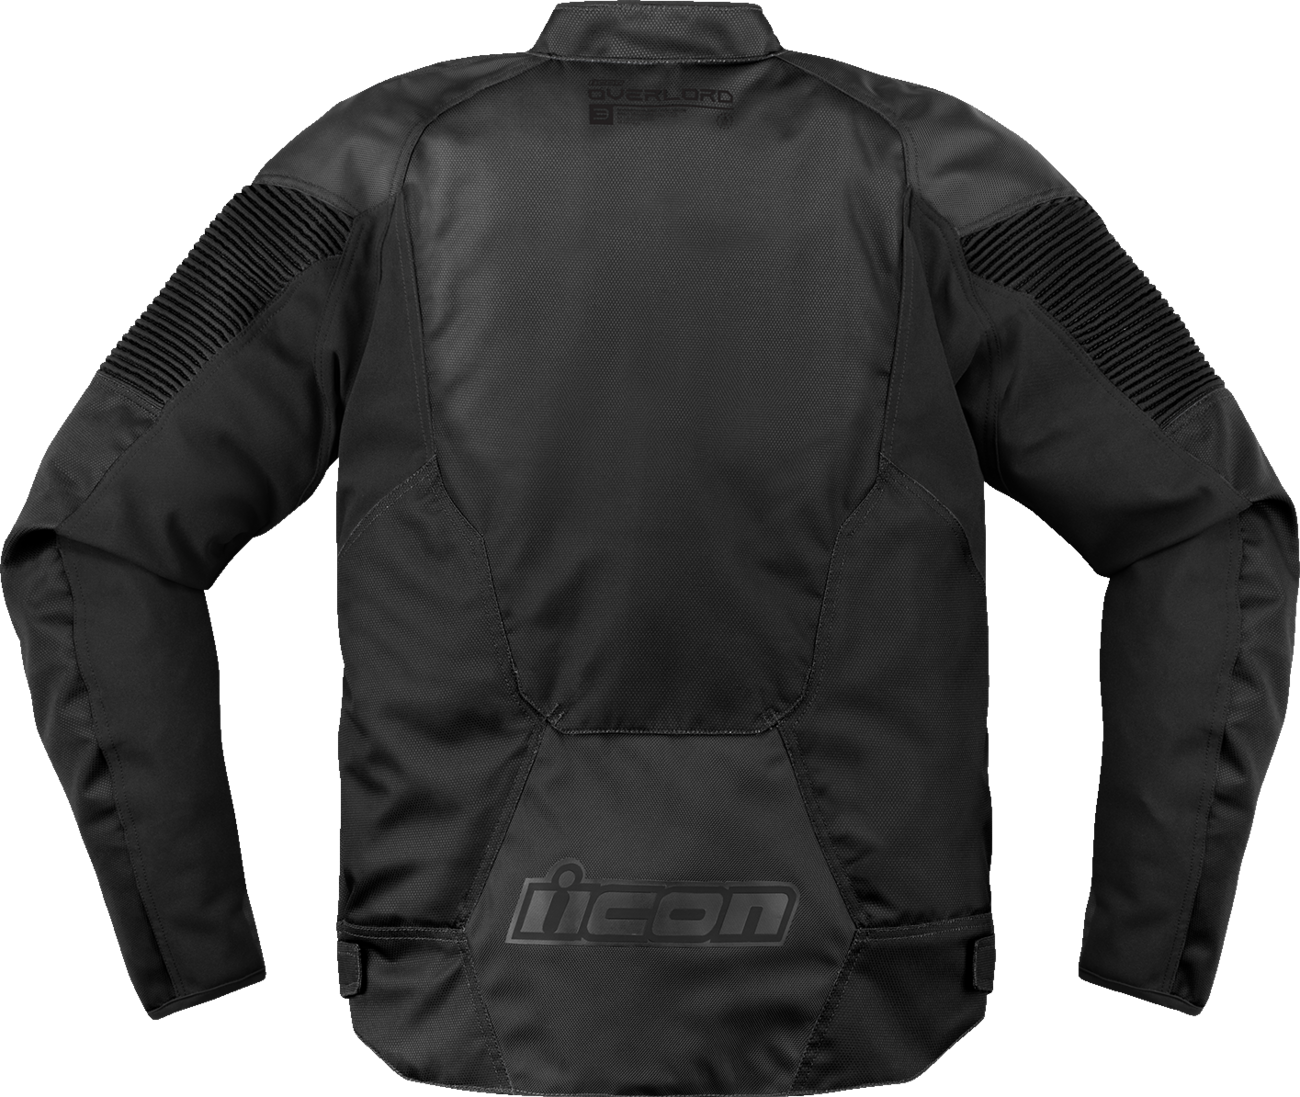 ICON Overlord3™ CE Jacket - Black - 2XL 2820-6691